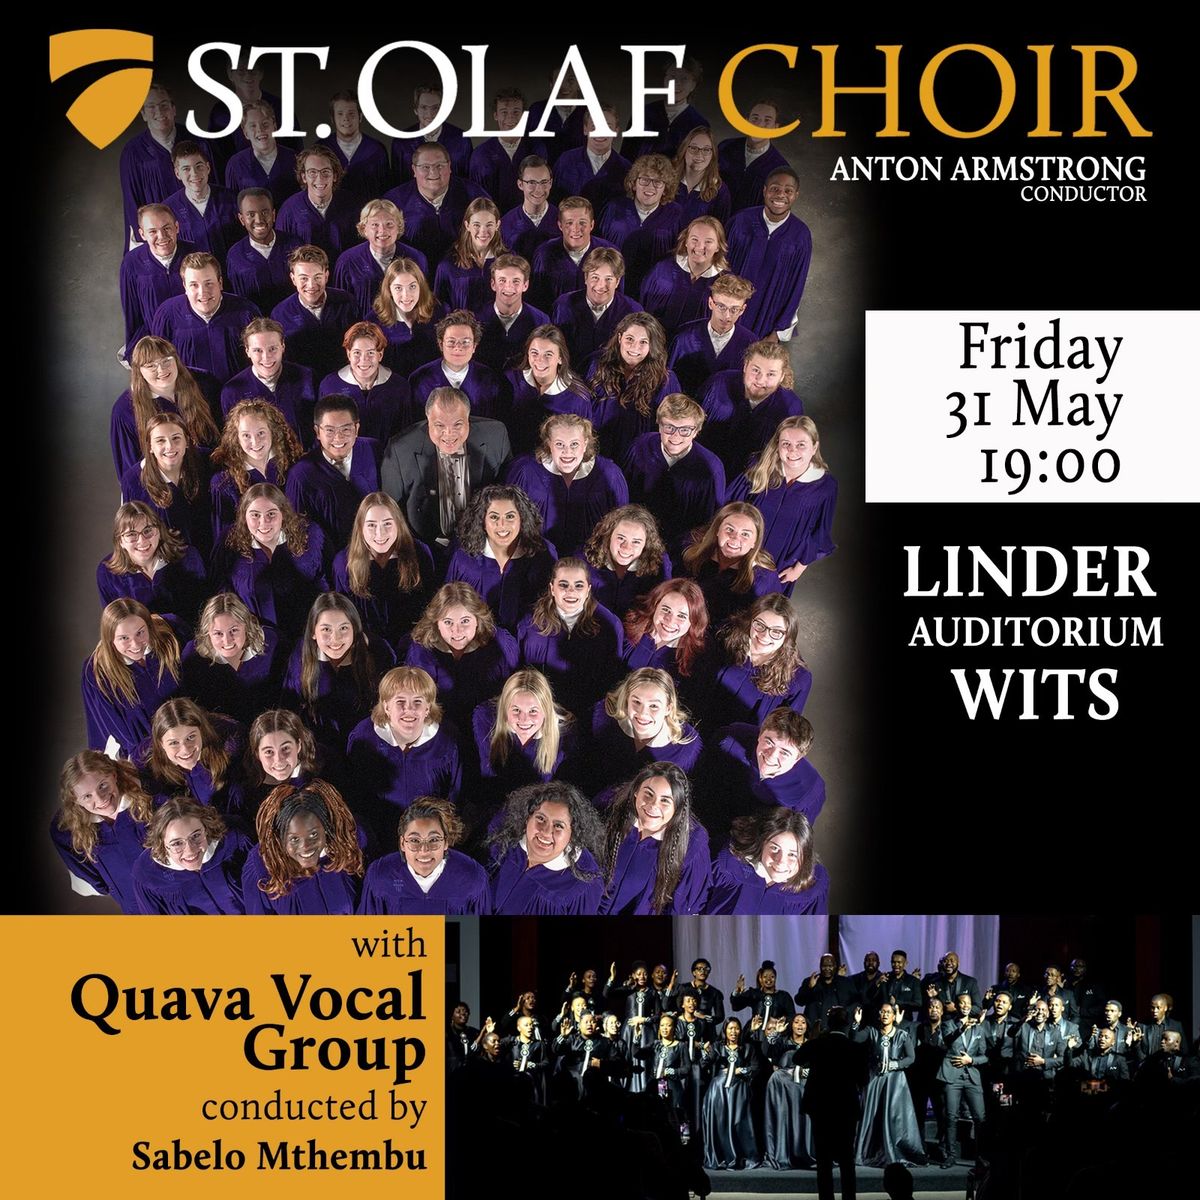 St. Olaf Choir in Concert with Quava Vocal Group